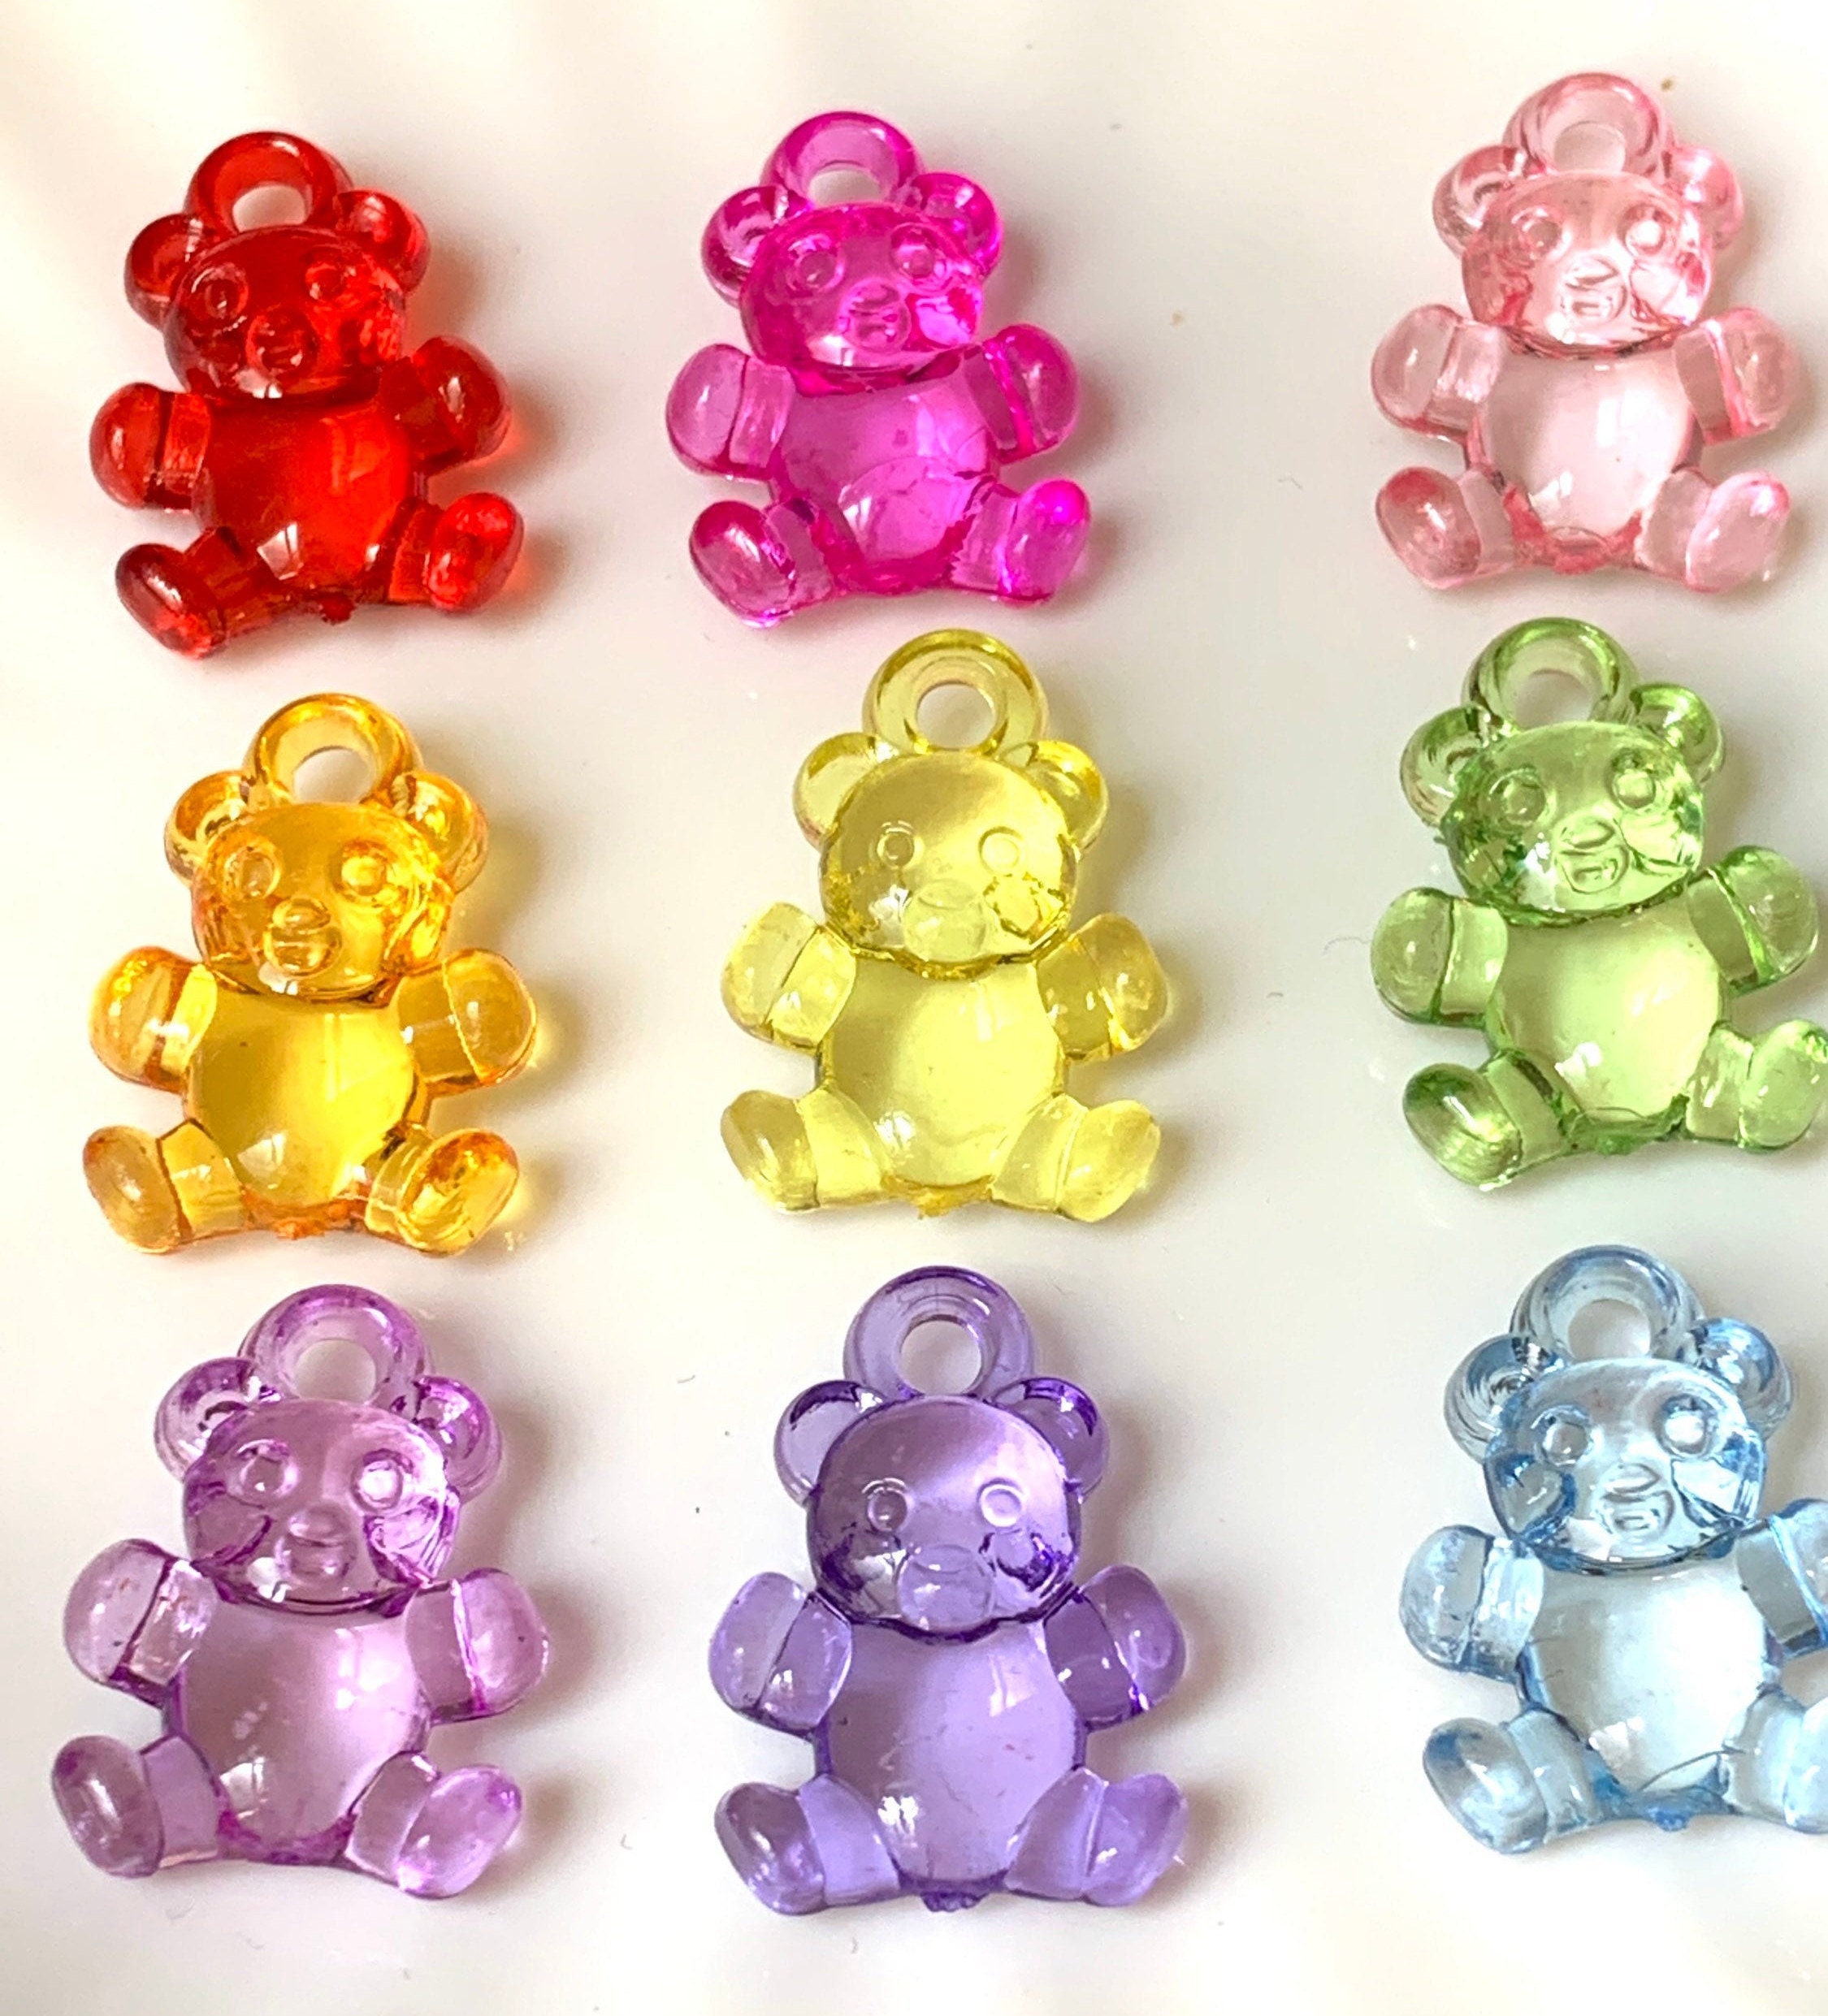 100 Cute Gummy Bear Resin Gummy Bear Charms For DIY Jewelry Decoration Flat  Back Necklace Pendant Earring Charps 11*23mm From Luckily8888, $17.25